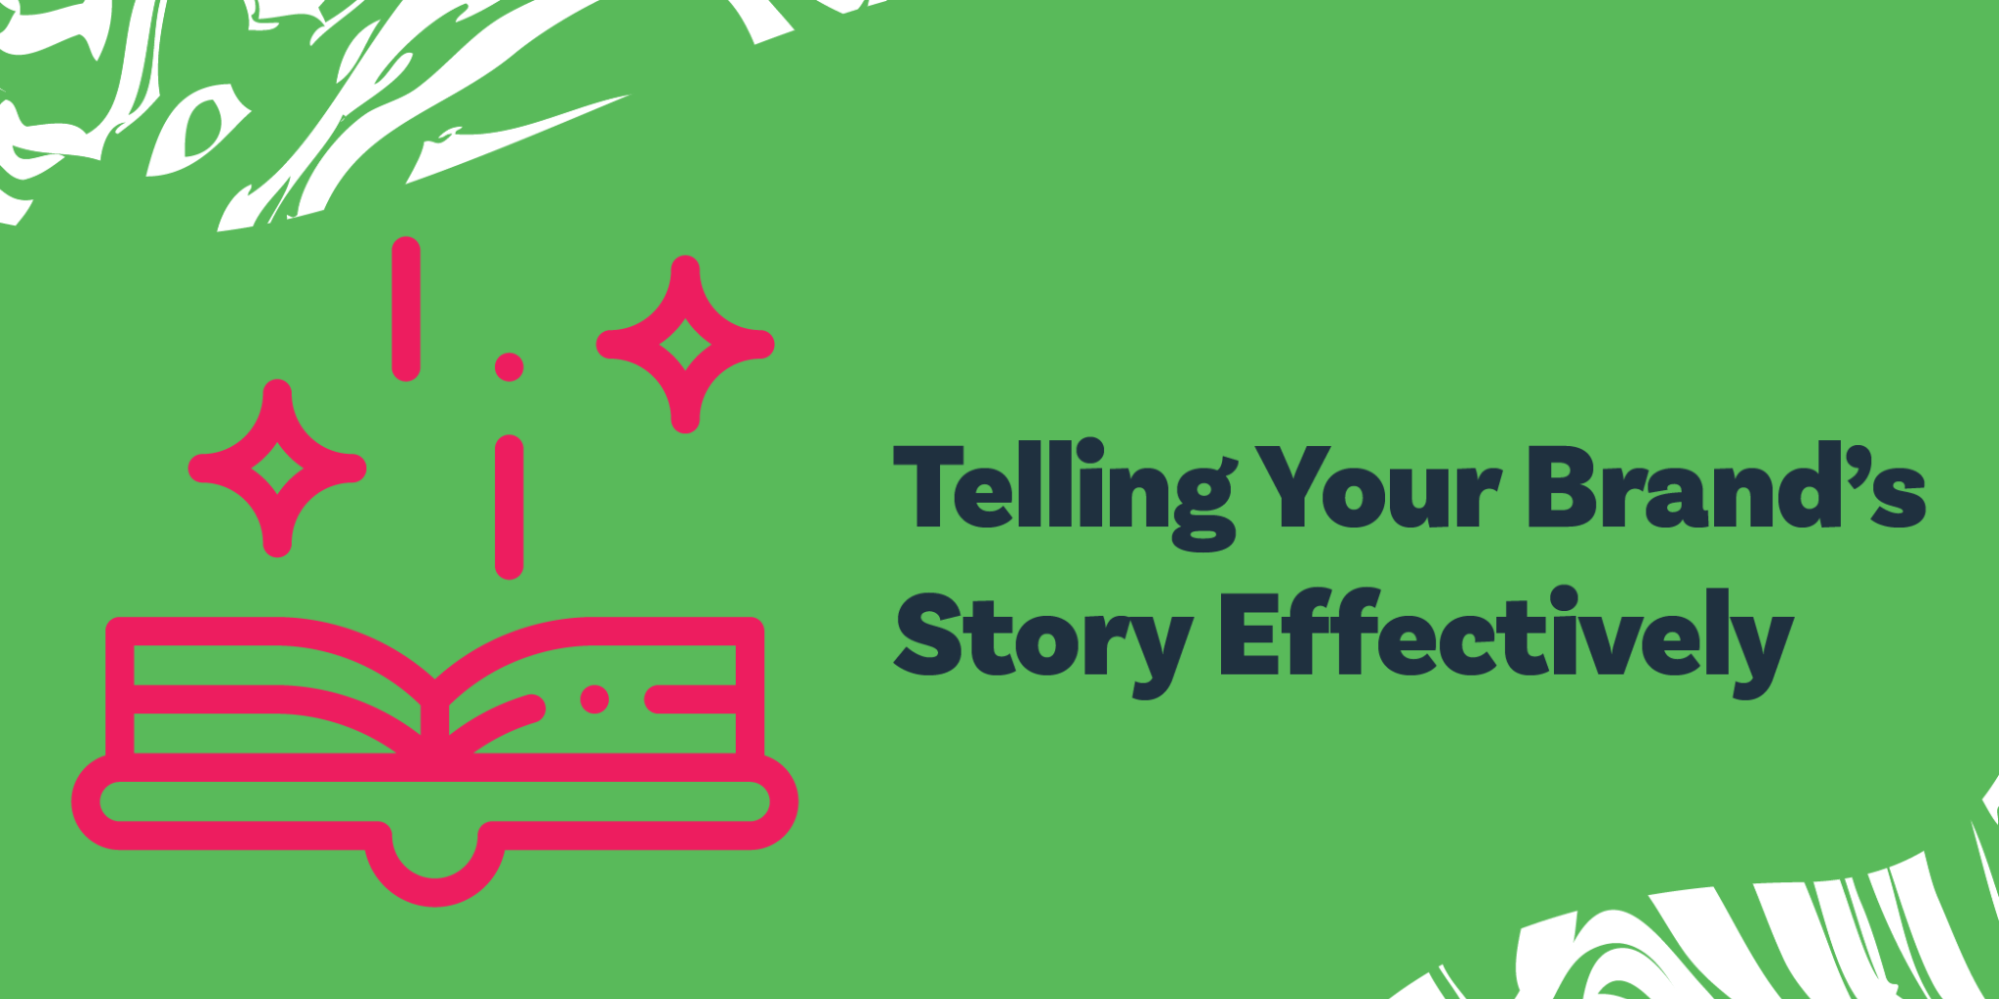 Telling Your Brand's Story Effectively